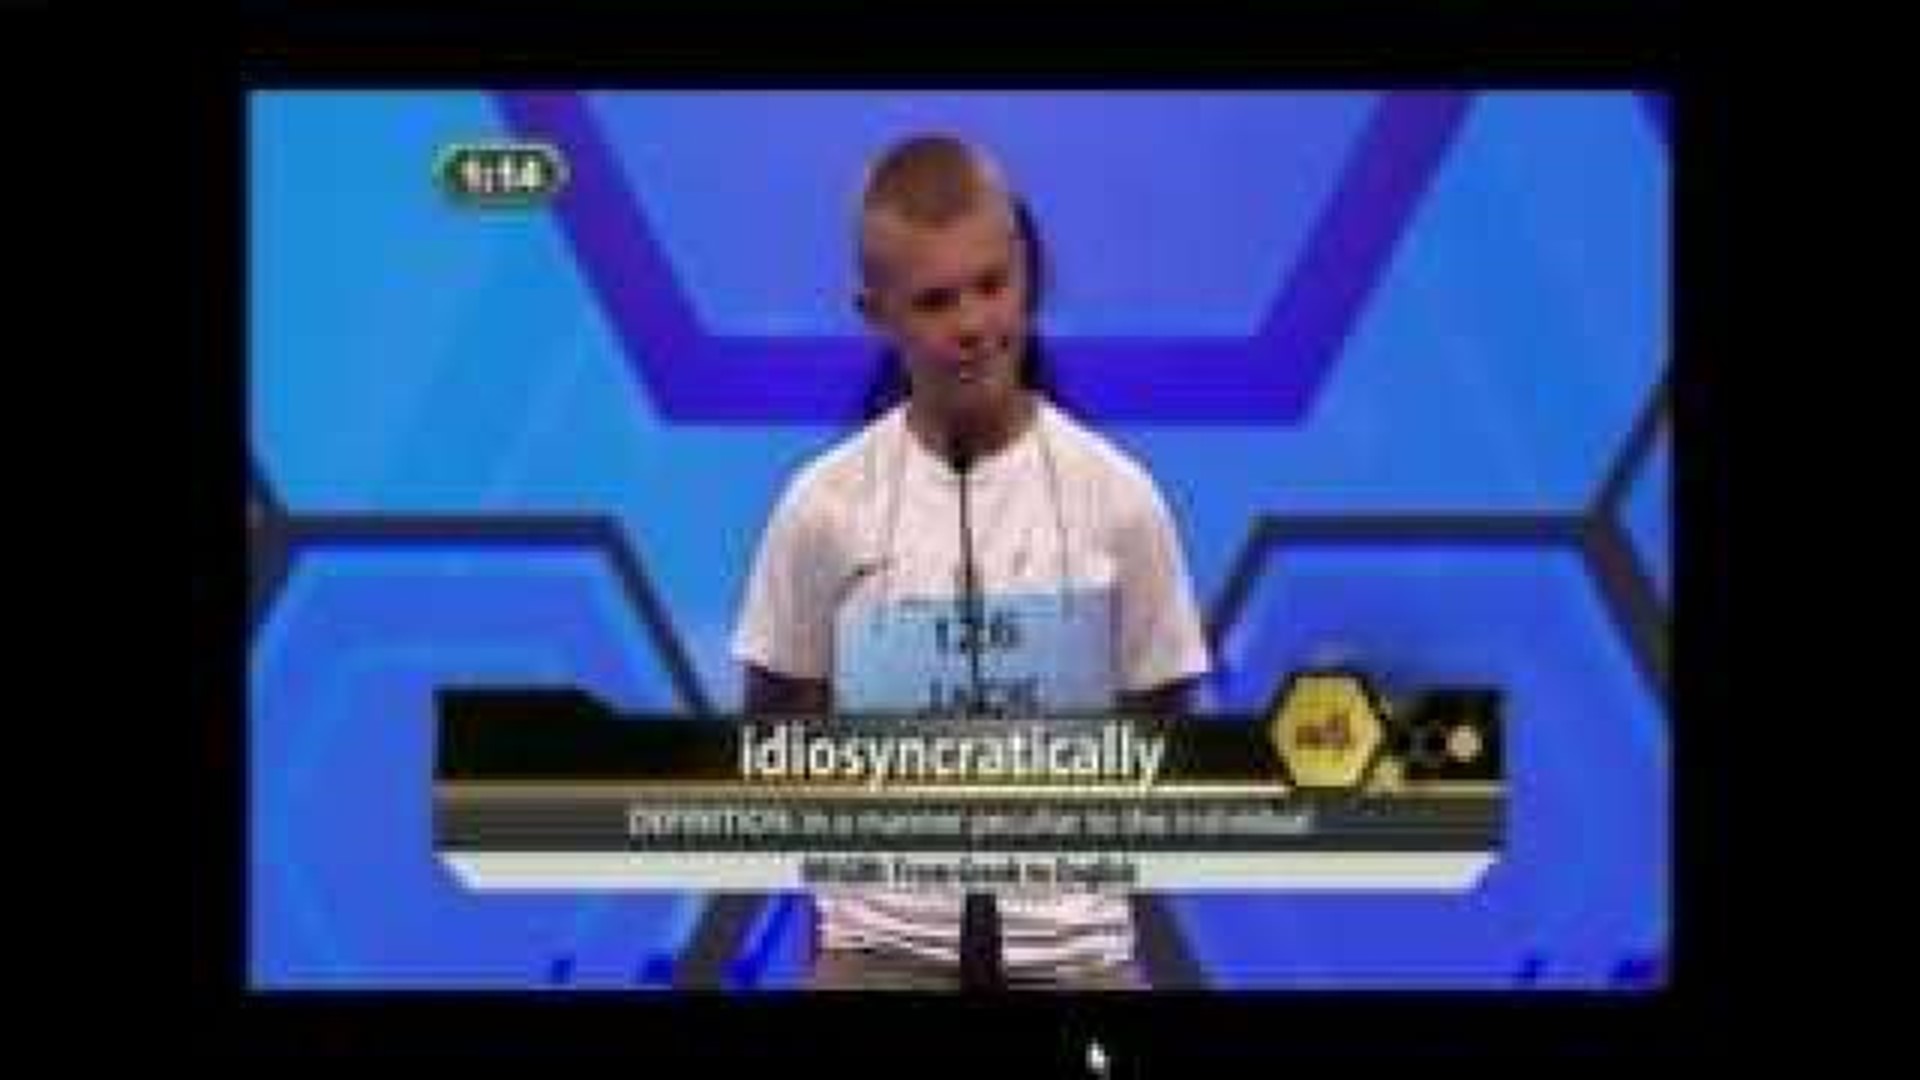 Spelling Bee: Idiosyncratically